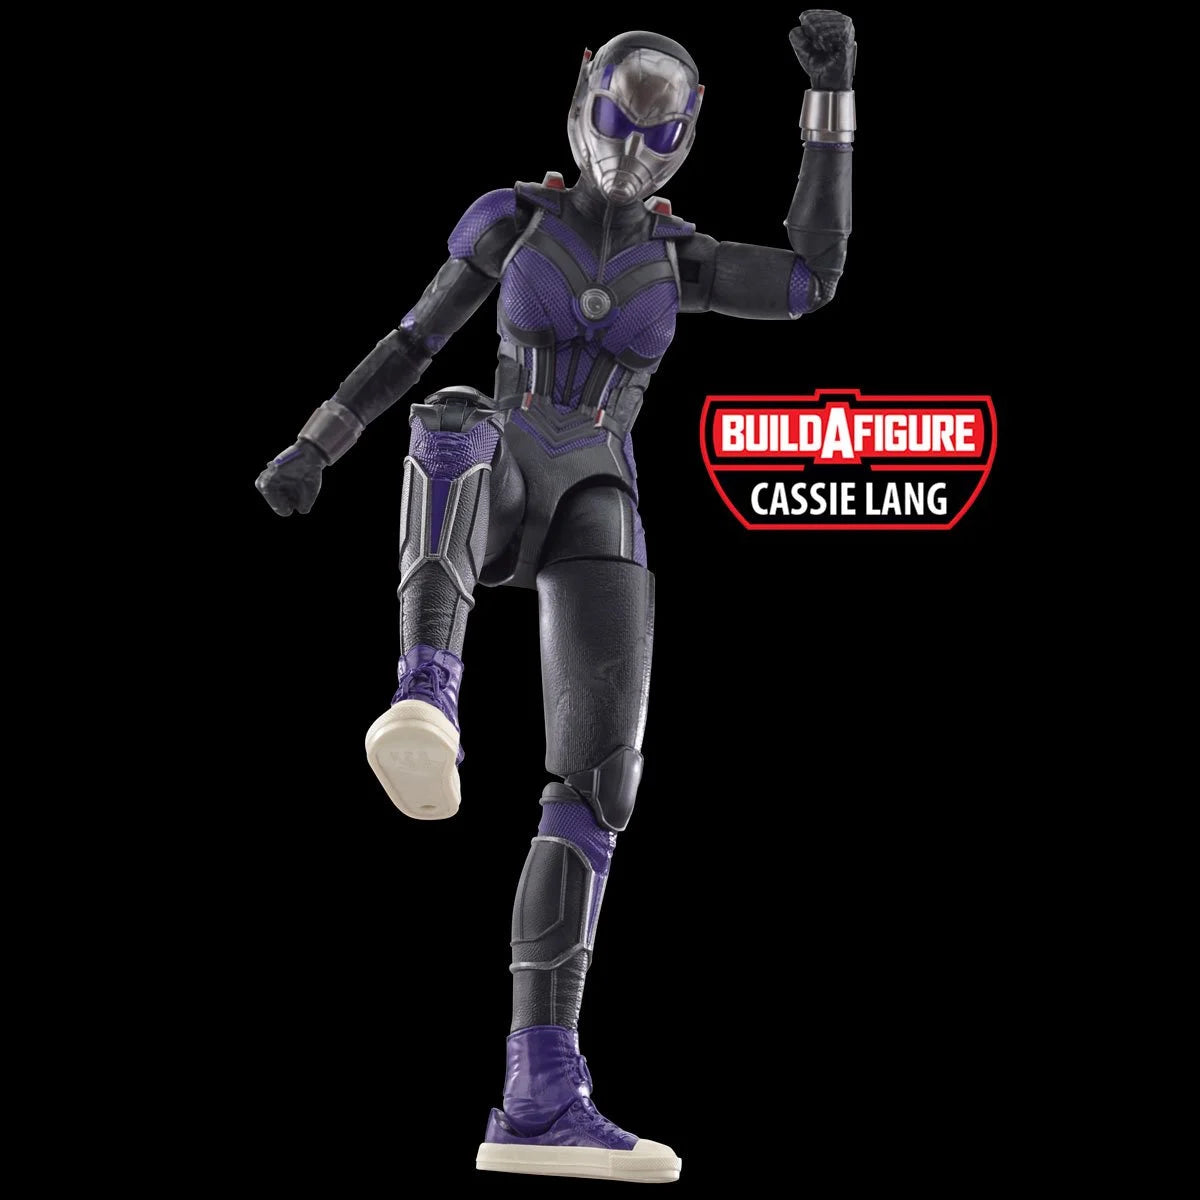 Ant-Man & the Wasp Quantumania Marvel Legends Marvel's Wasp 6-Inch Action Figure